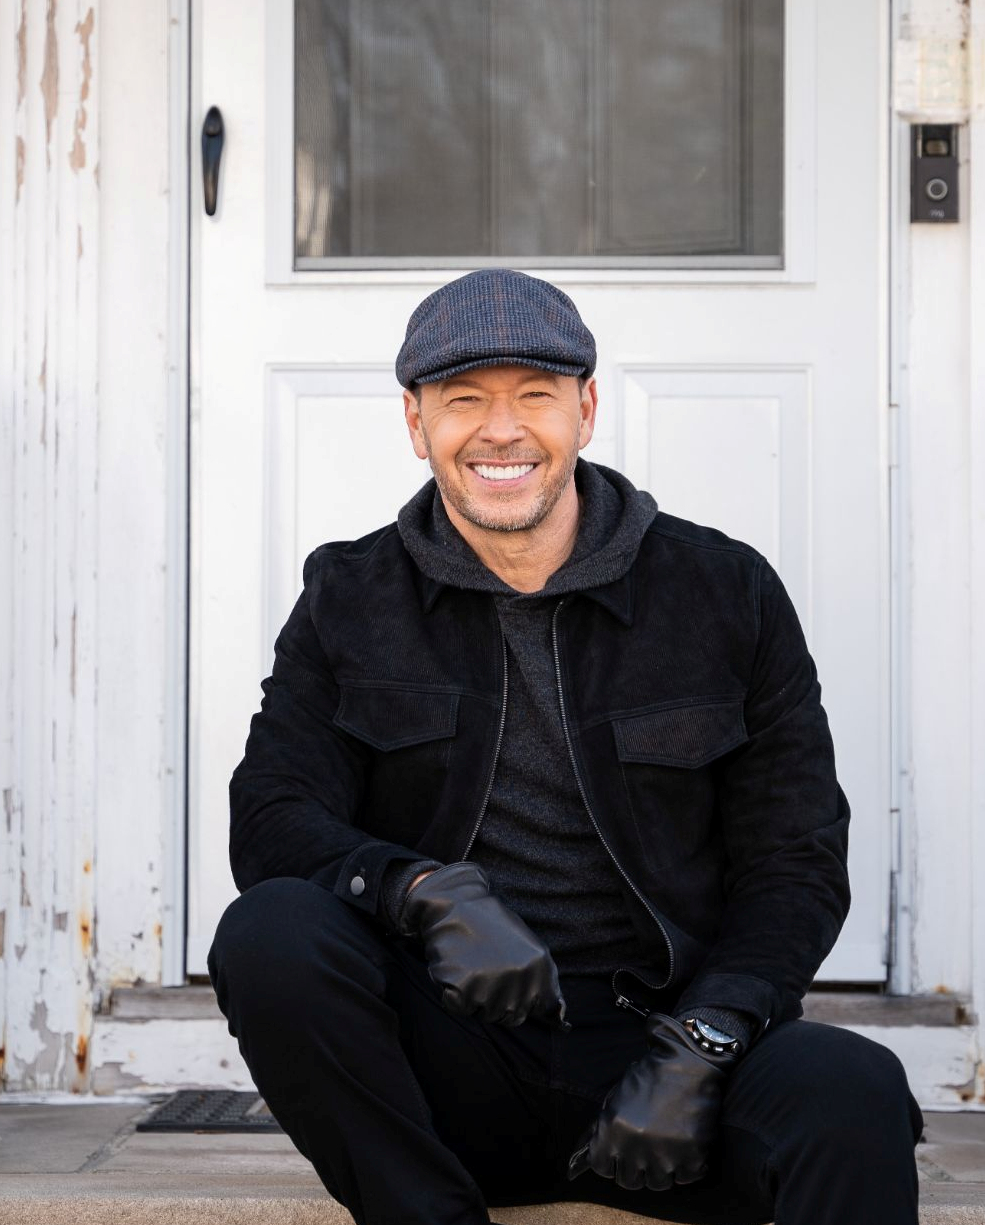 New Biofuel on the Block: An Interview with Donnie Wahlberg for the Clean Fuels Alliance of America